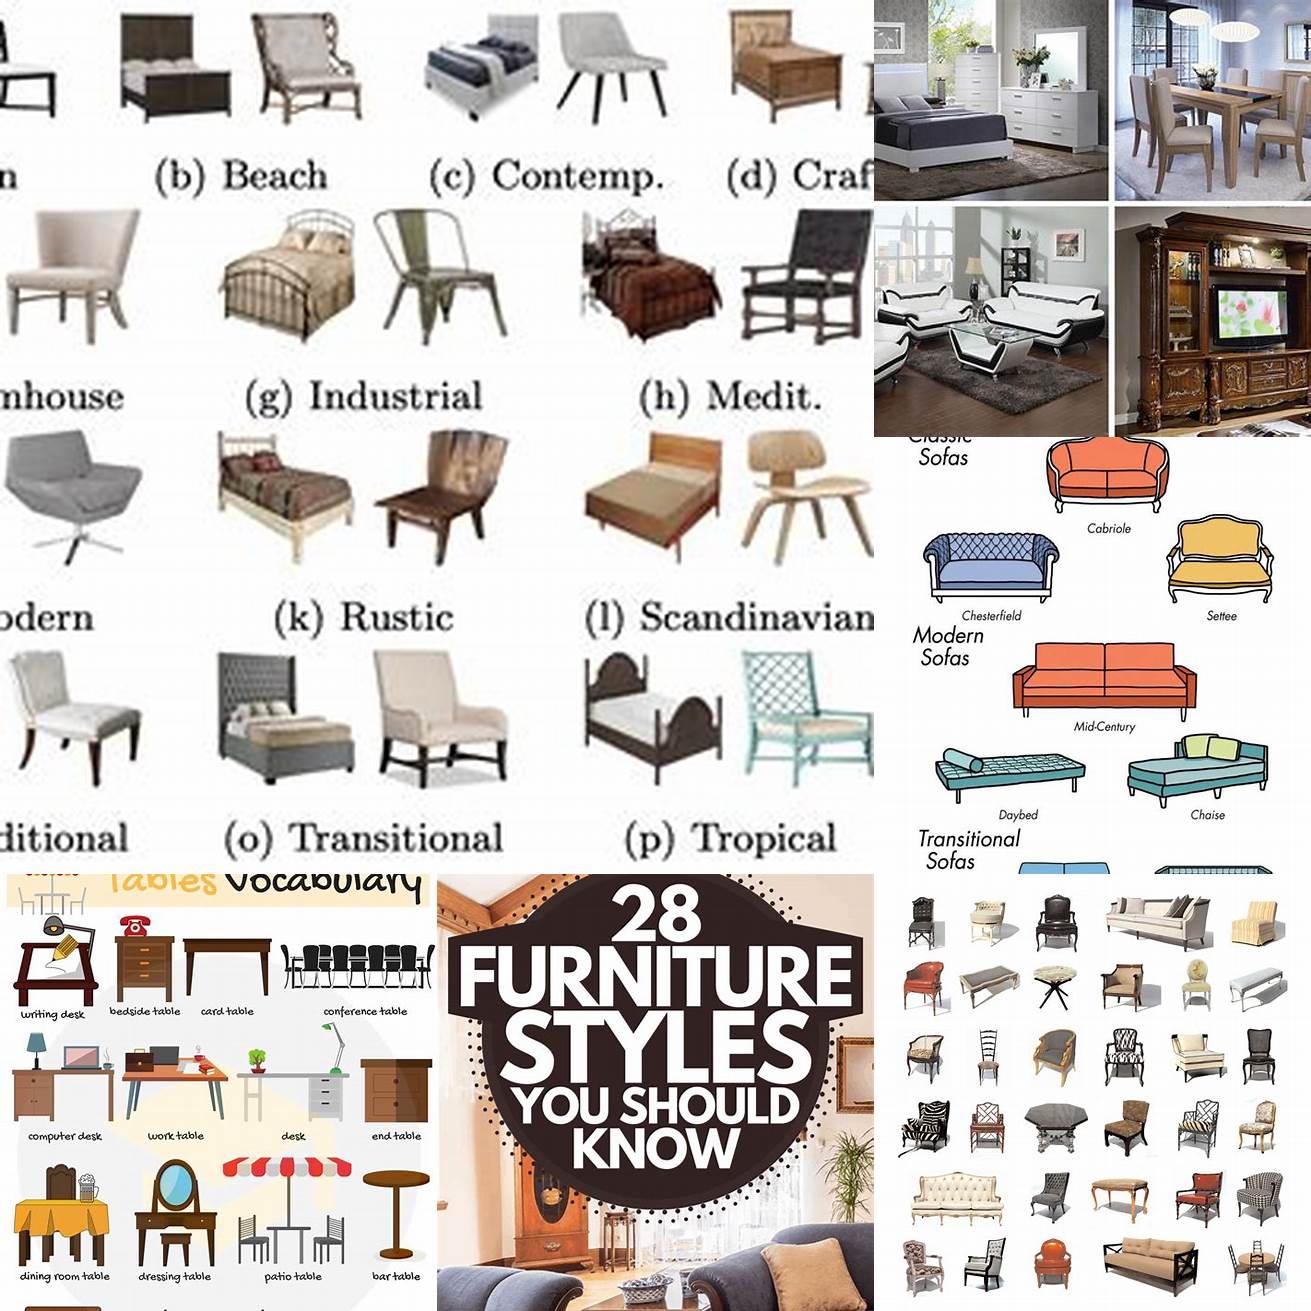 Styles of Furniture